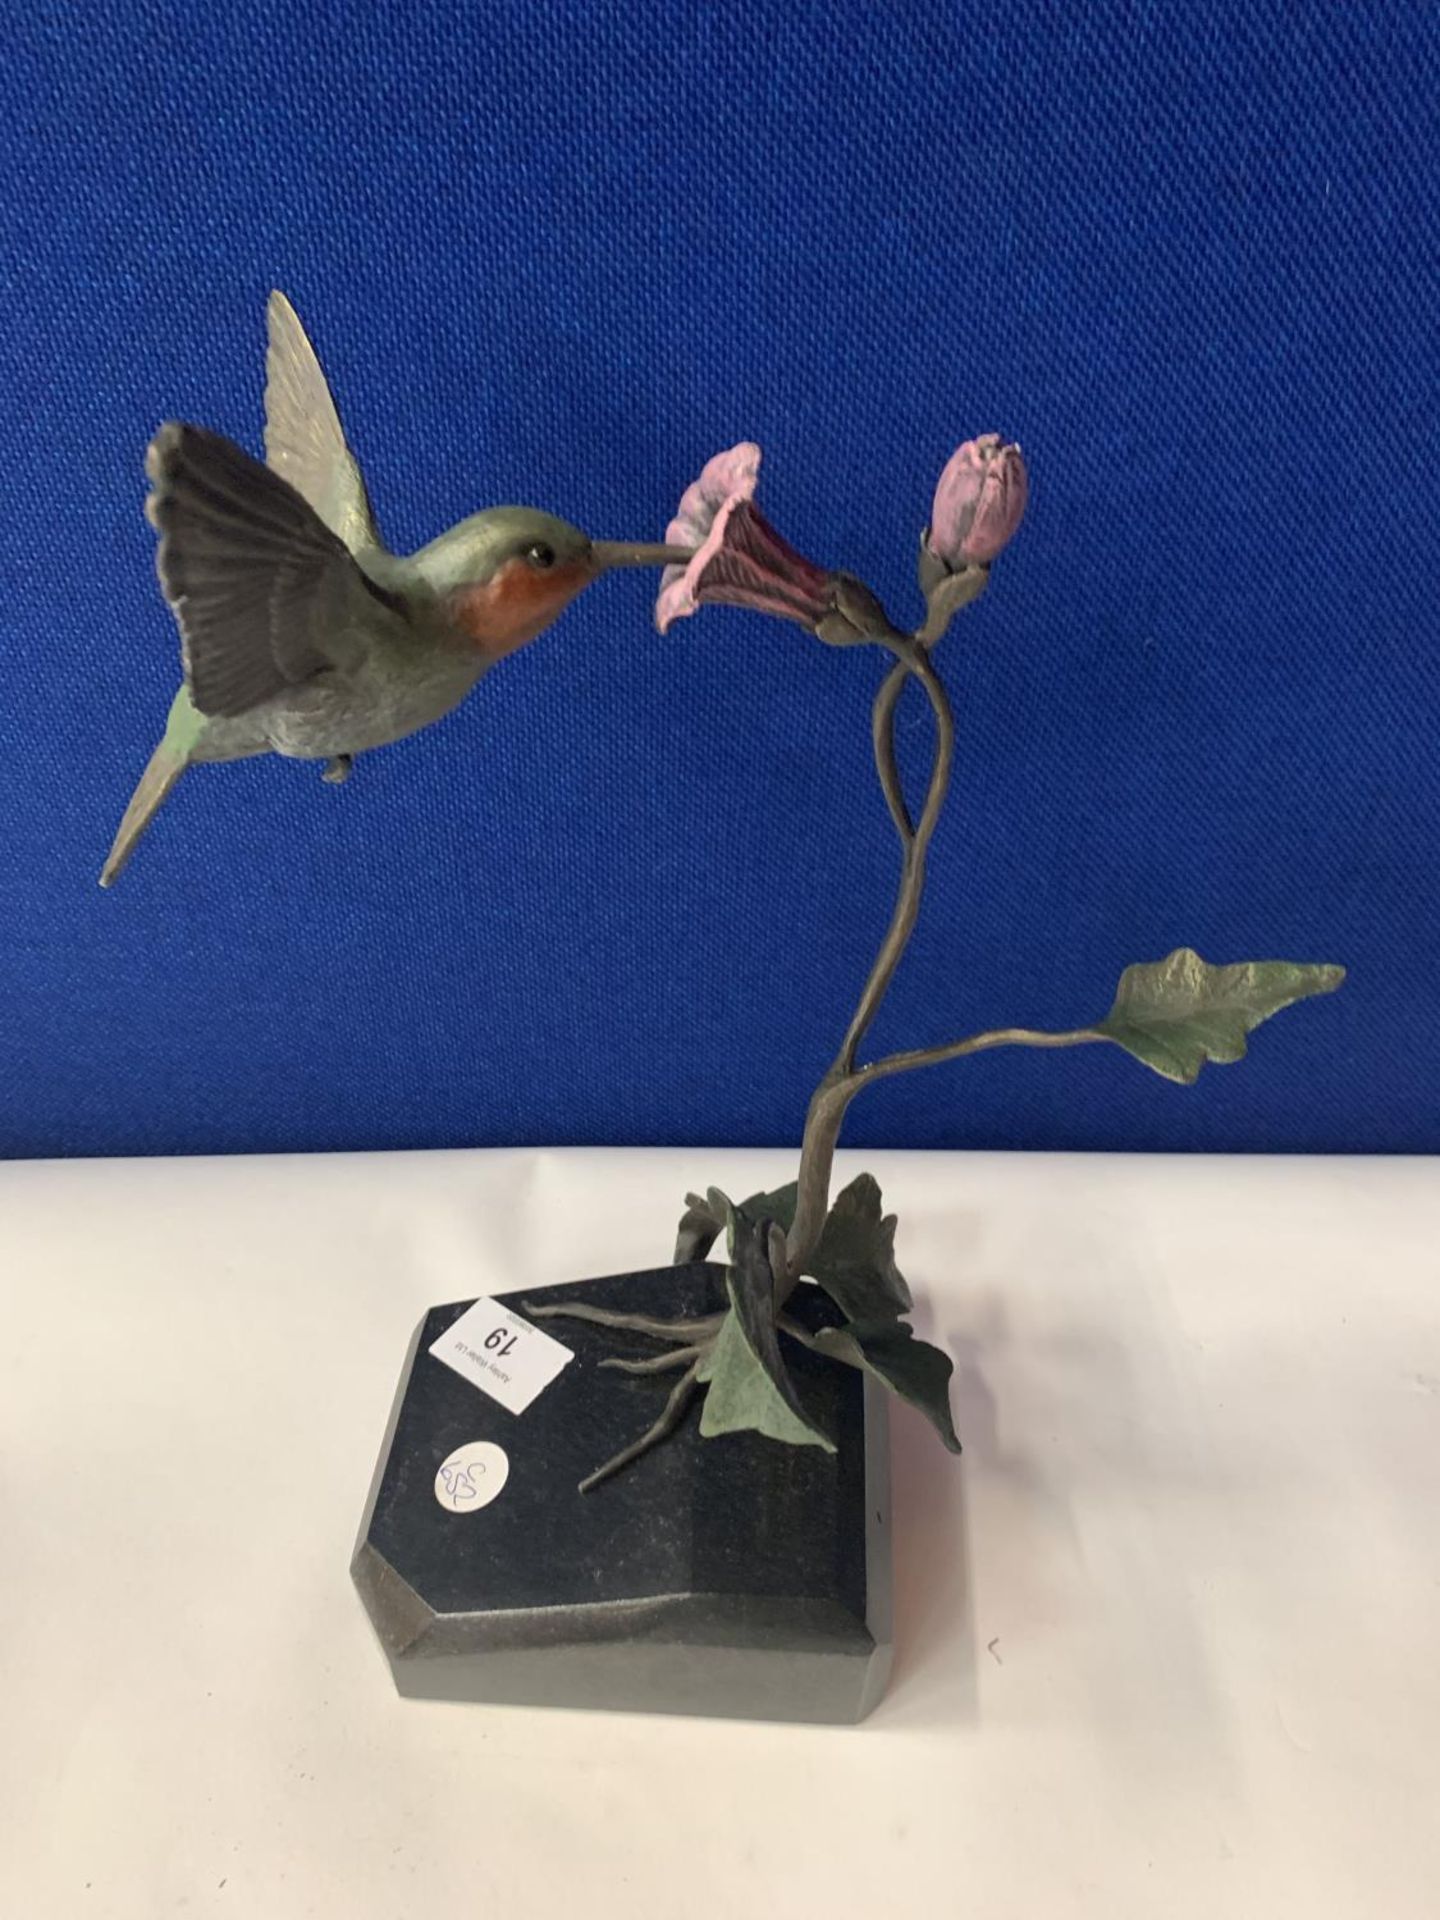 A CAST SCULPTURE OF A HUMMING BIRD ON A GRANITE BASE - Image 10 of 15